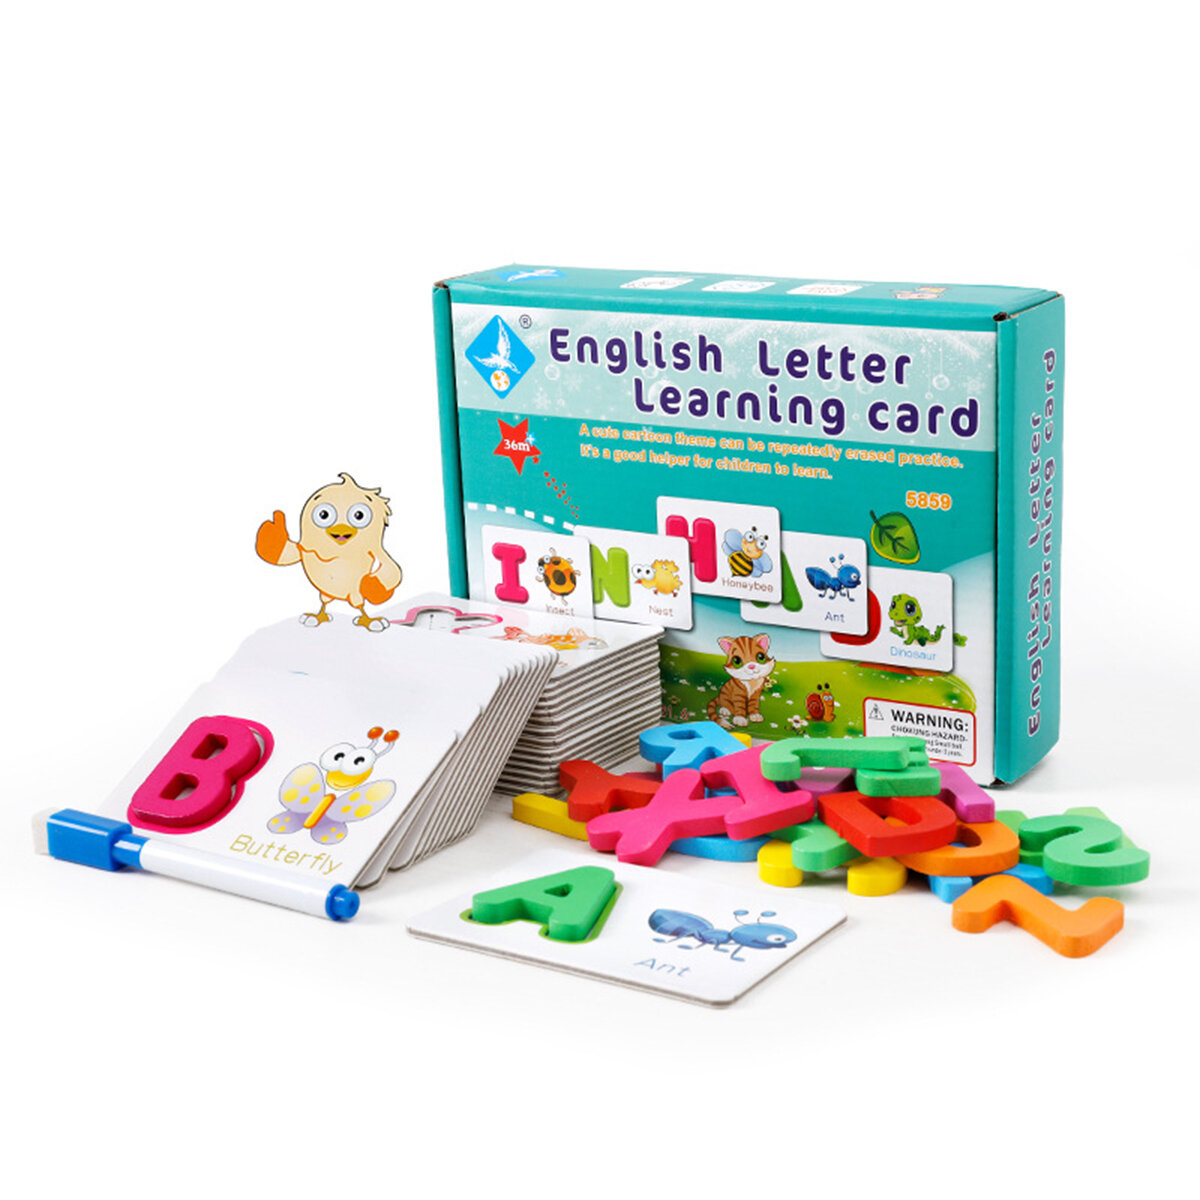 Puzzle Alphabet Spelling English Letters Animal Cards Educational Learning Toy for Kids Gift